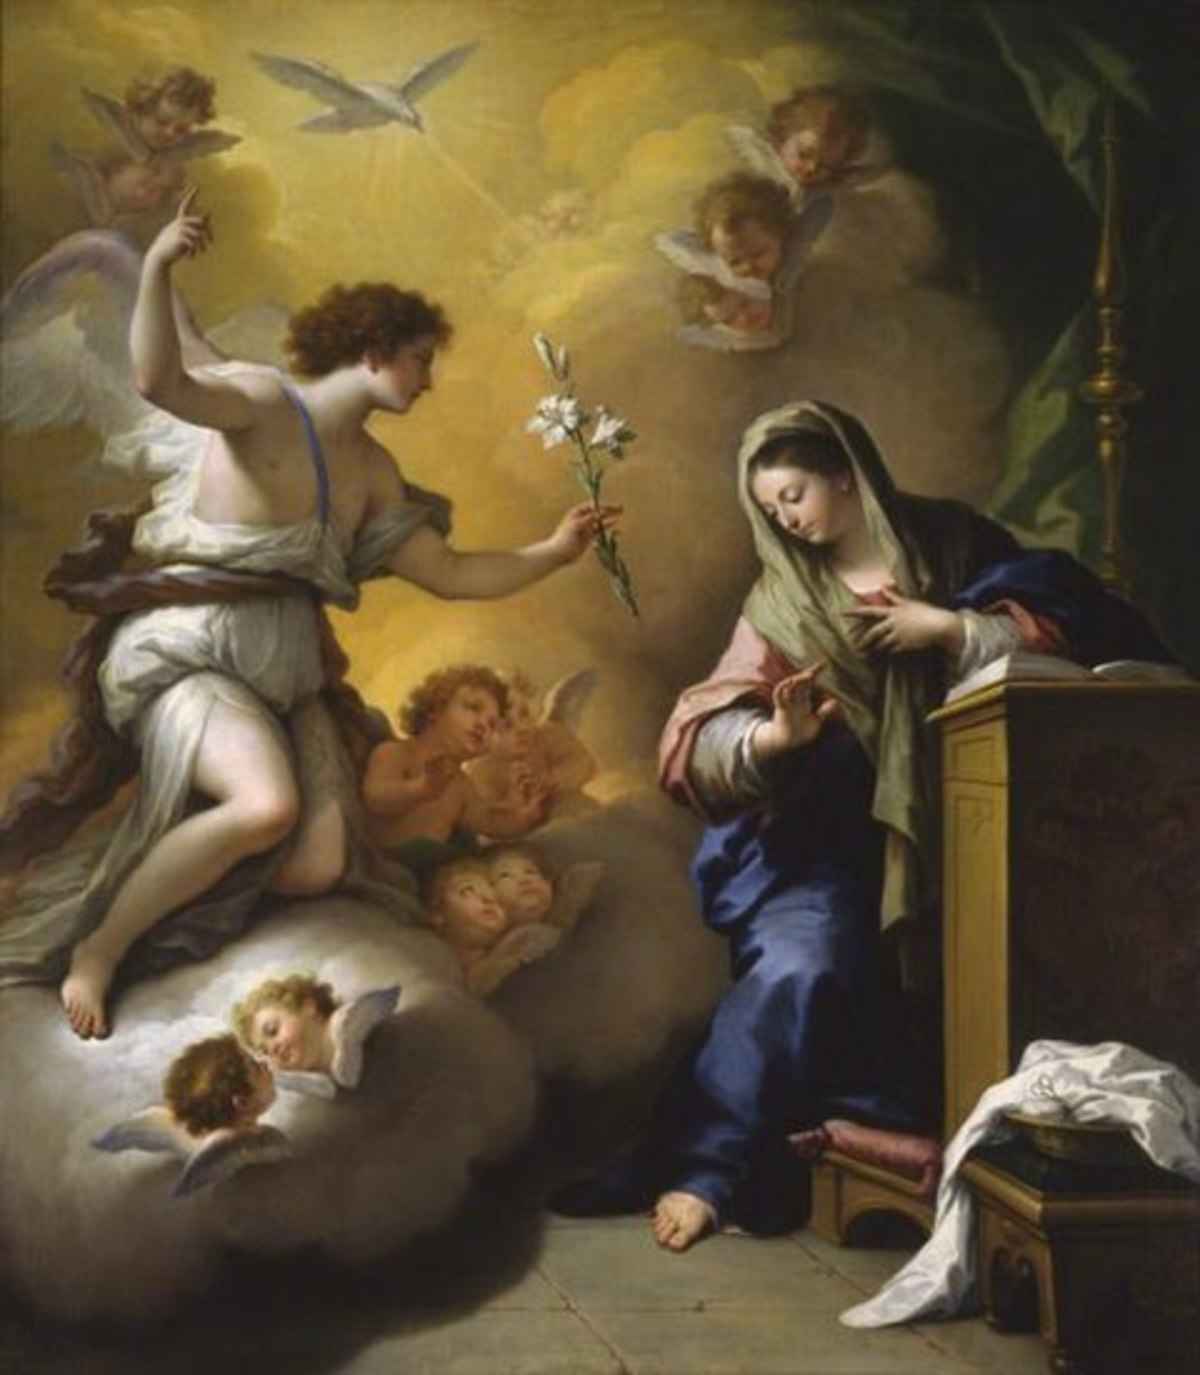 Saint of the day The Feast of the Annunciation Angelus News